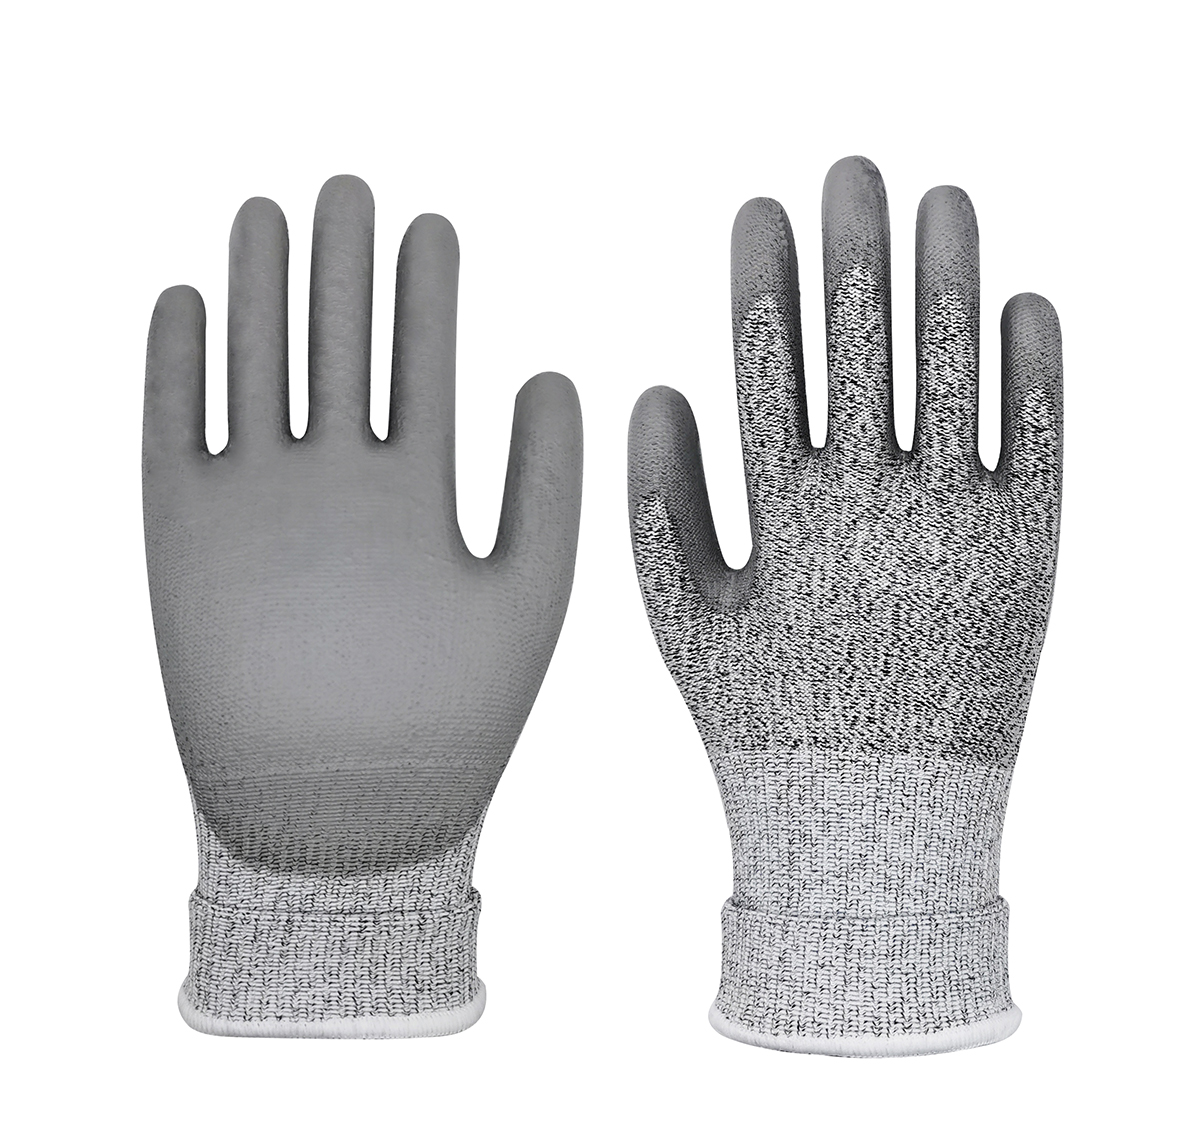 HPPE Extended Cut Resistant PU Coated Palm Gloves